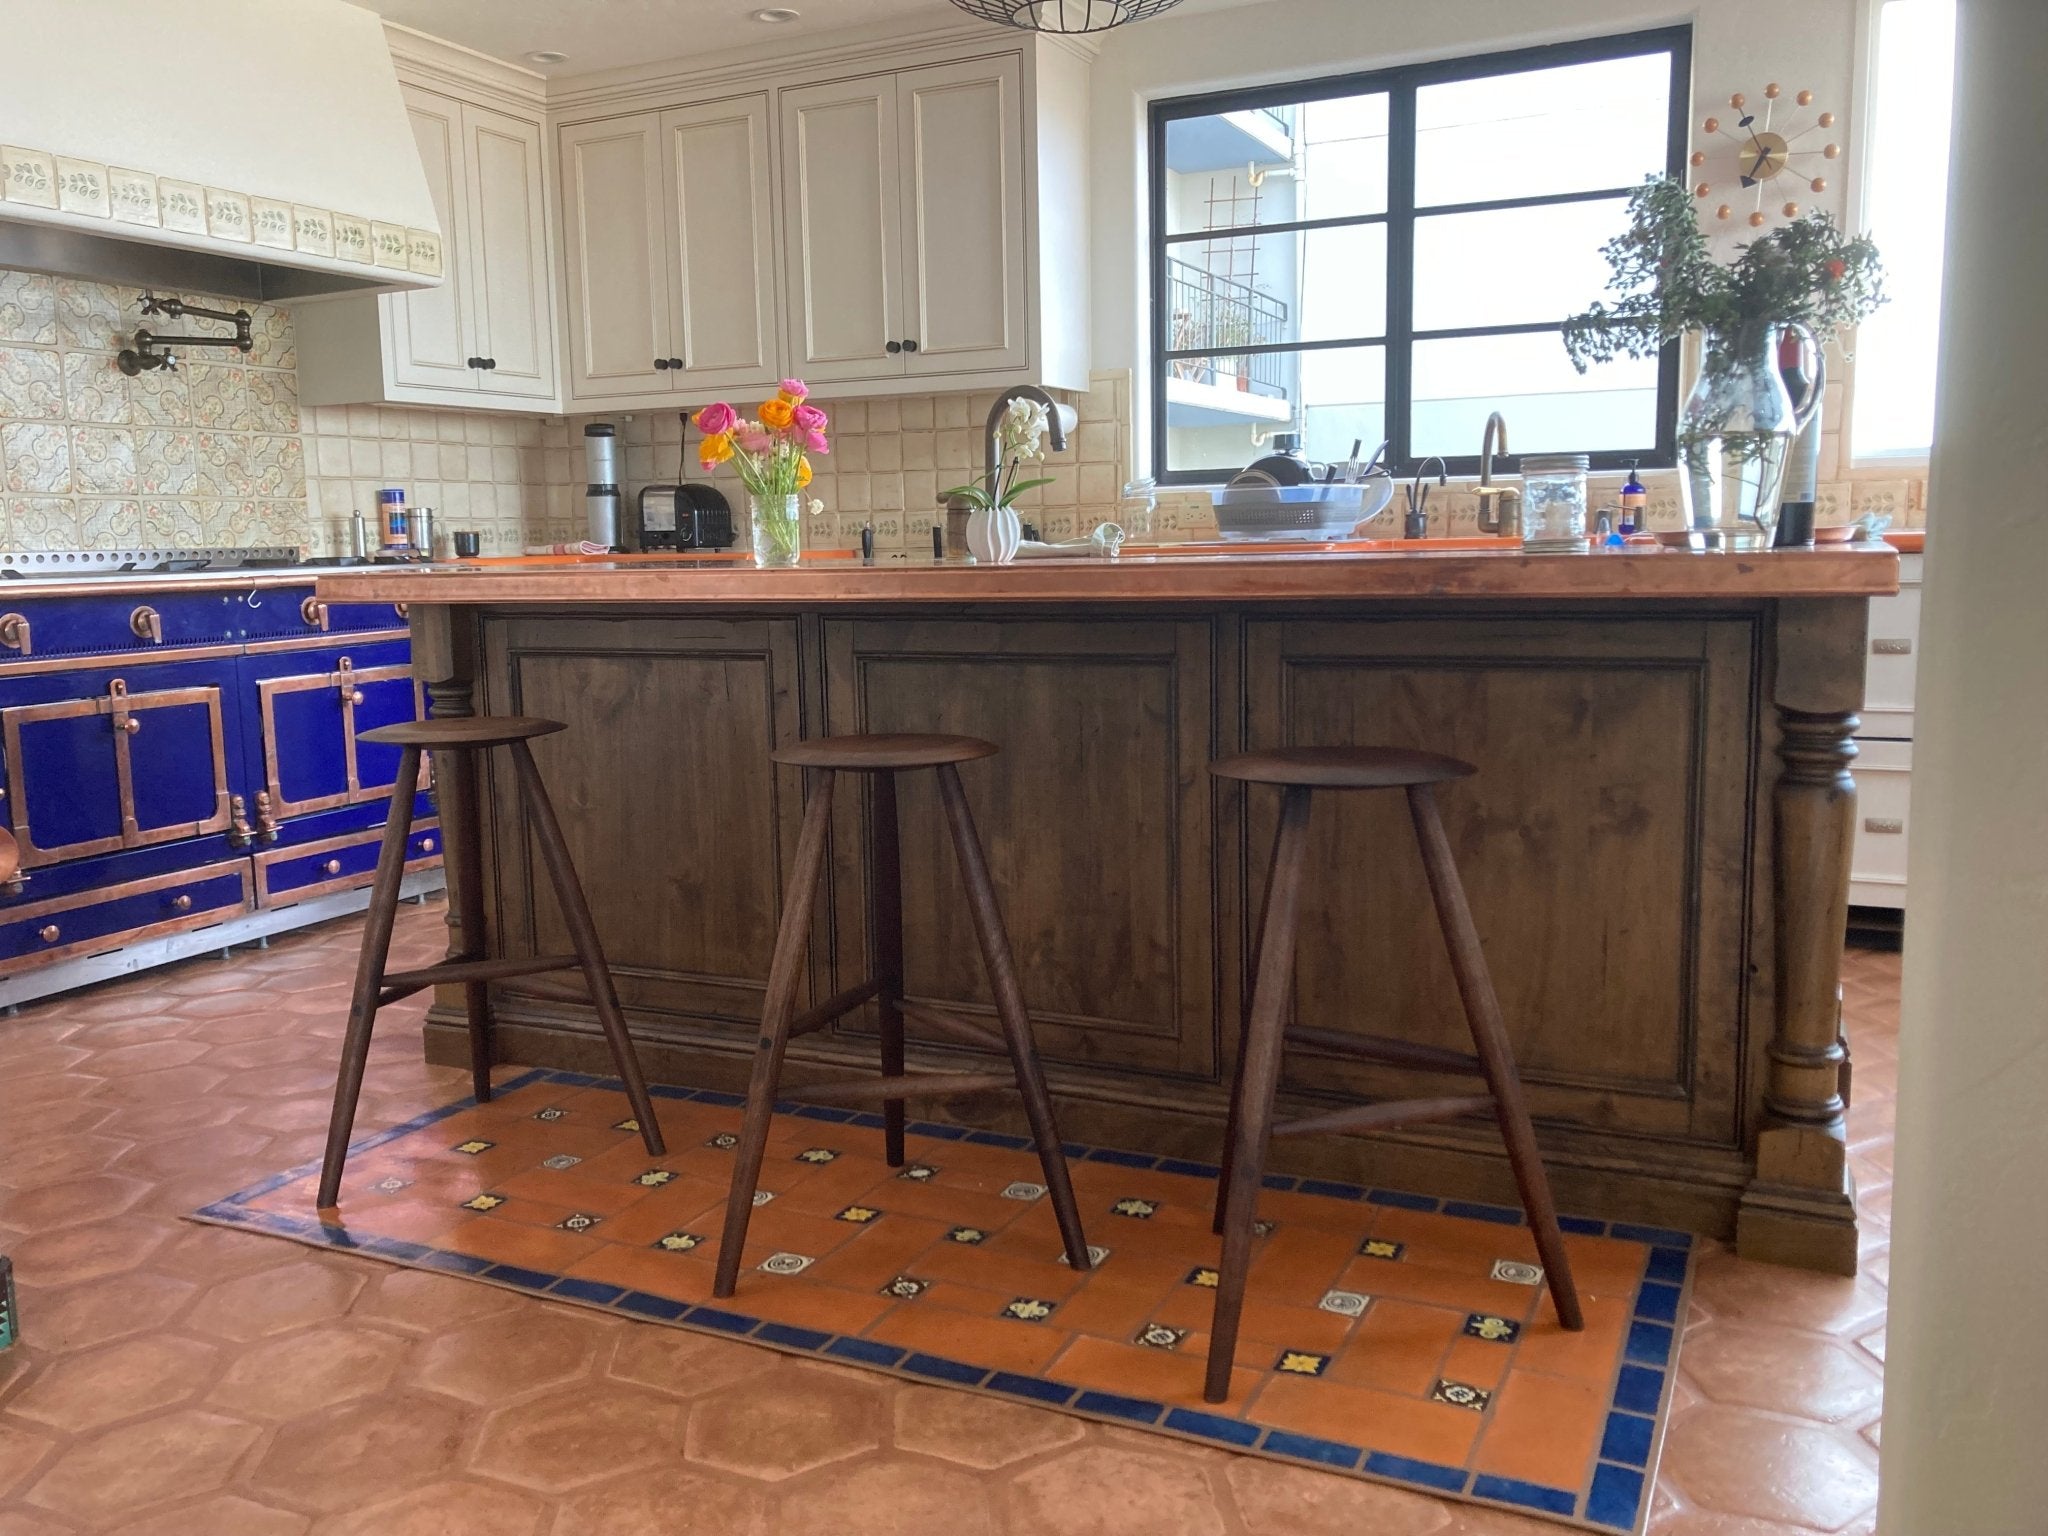 In-Situ image of Mexican Tile Floorcloth #1 in its San Francisco kitchen.